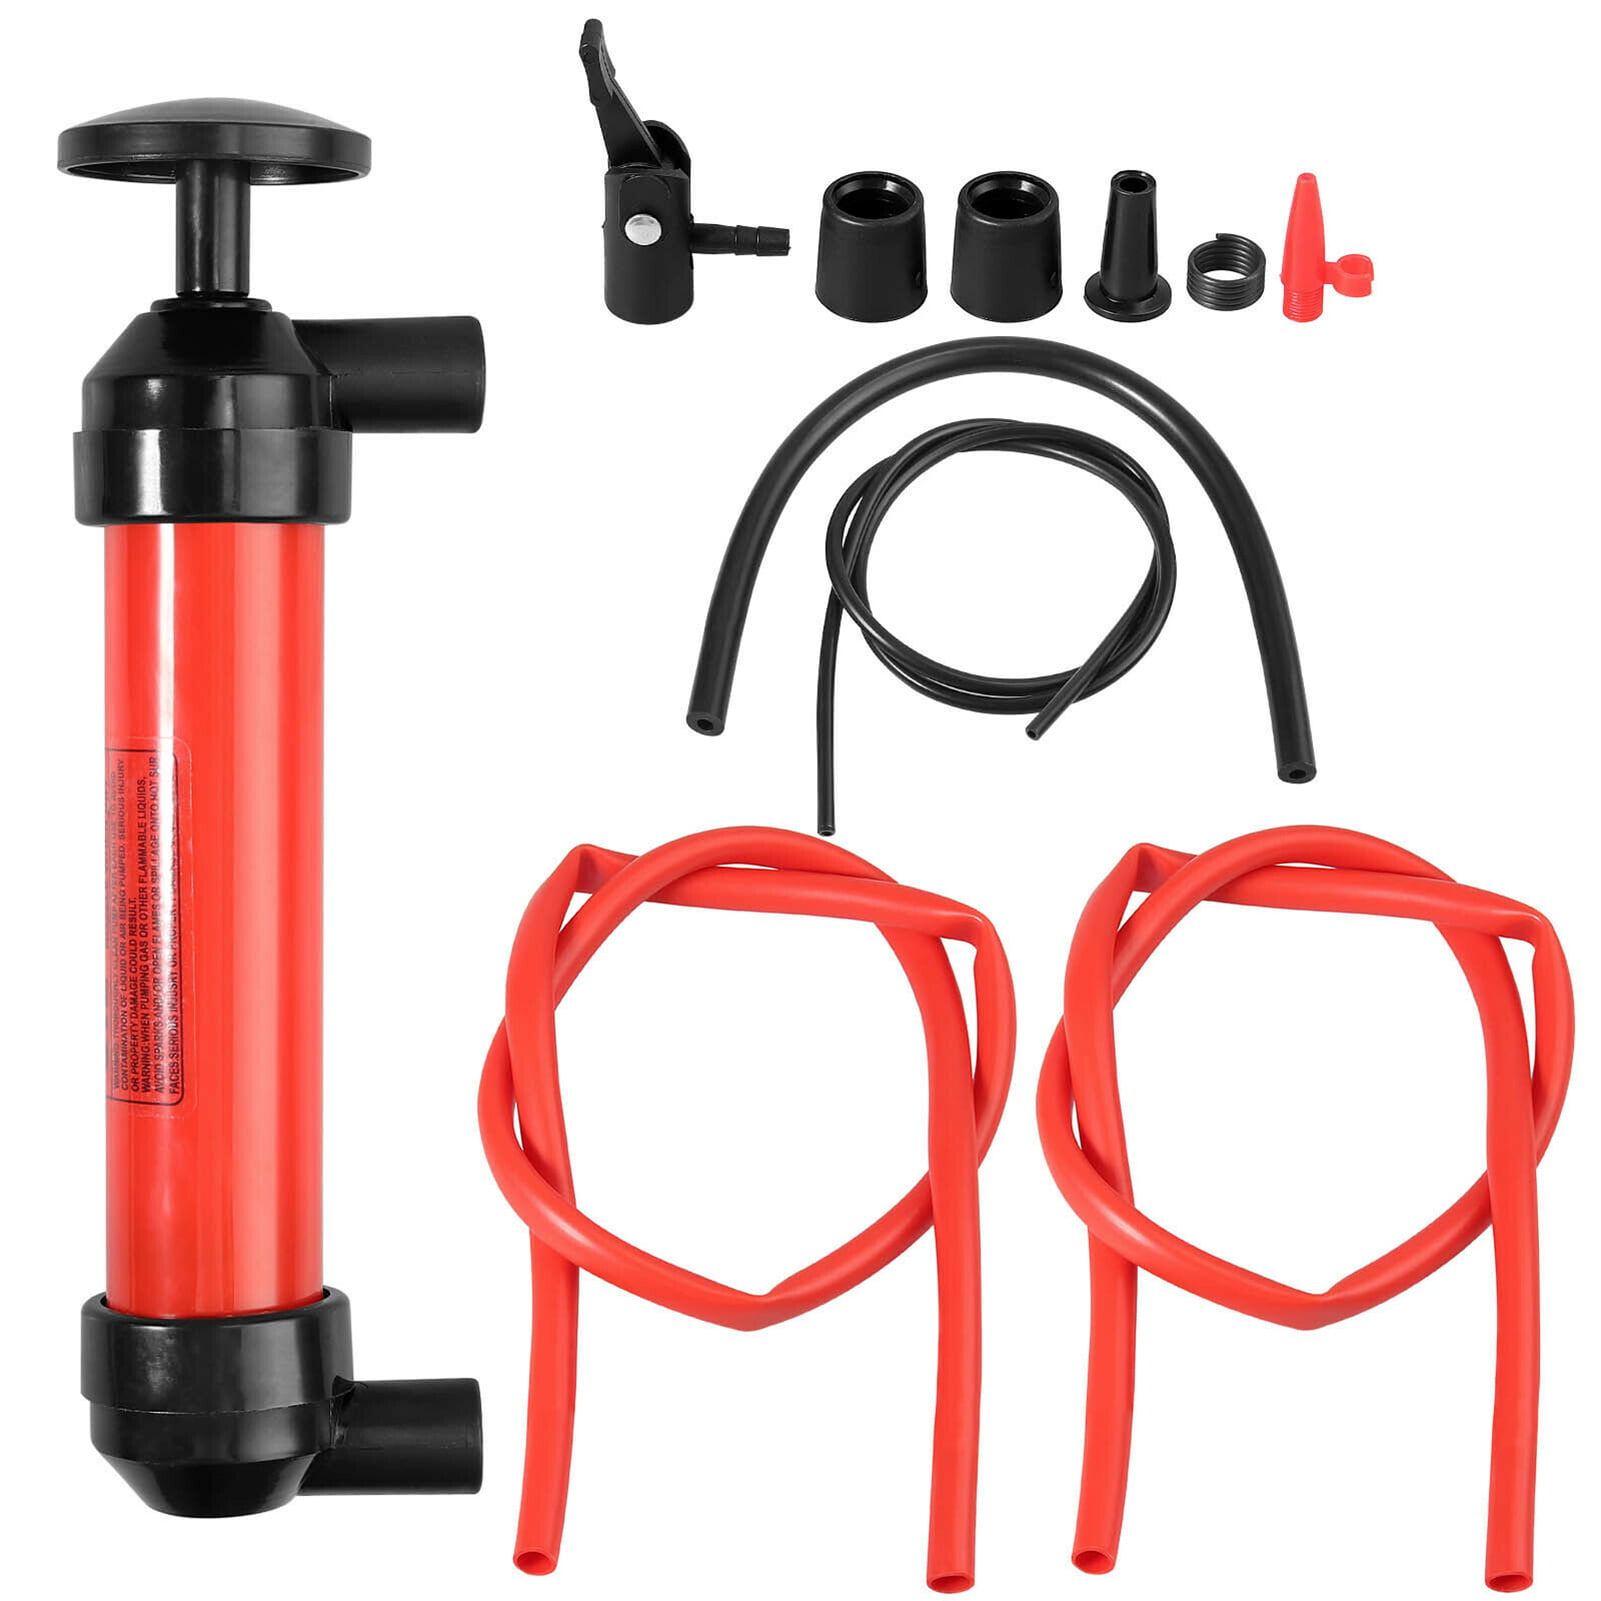 CAR SIPHON FUEL TRANSFER MANUAL PUMP Water Inflator Hand Syphon Fluid Extractor. 